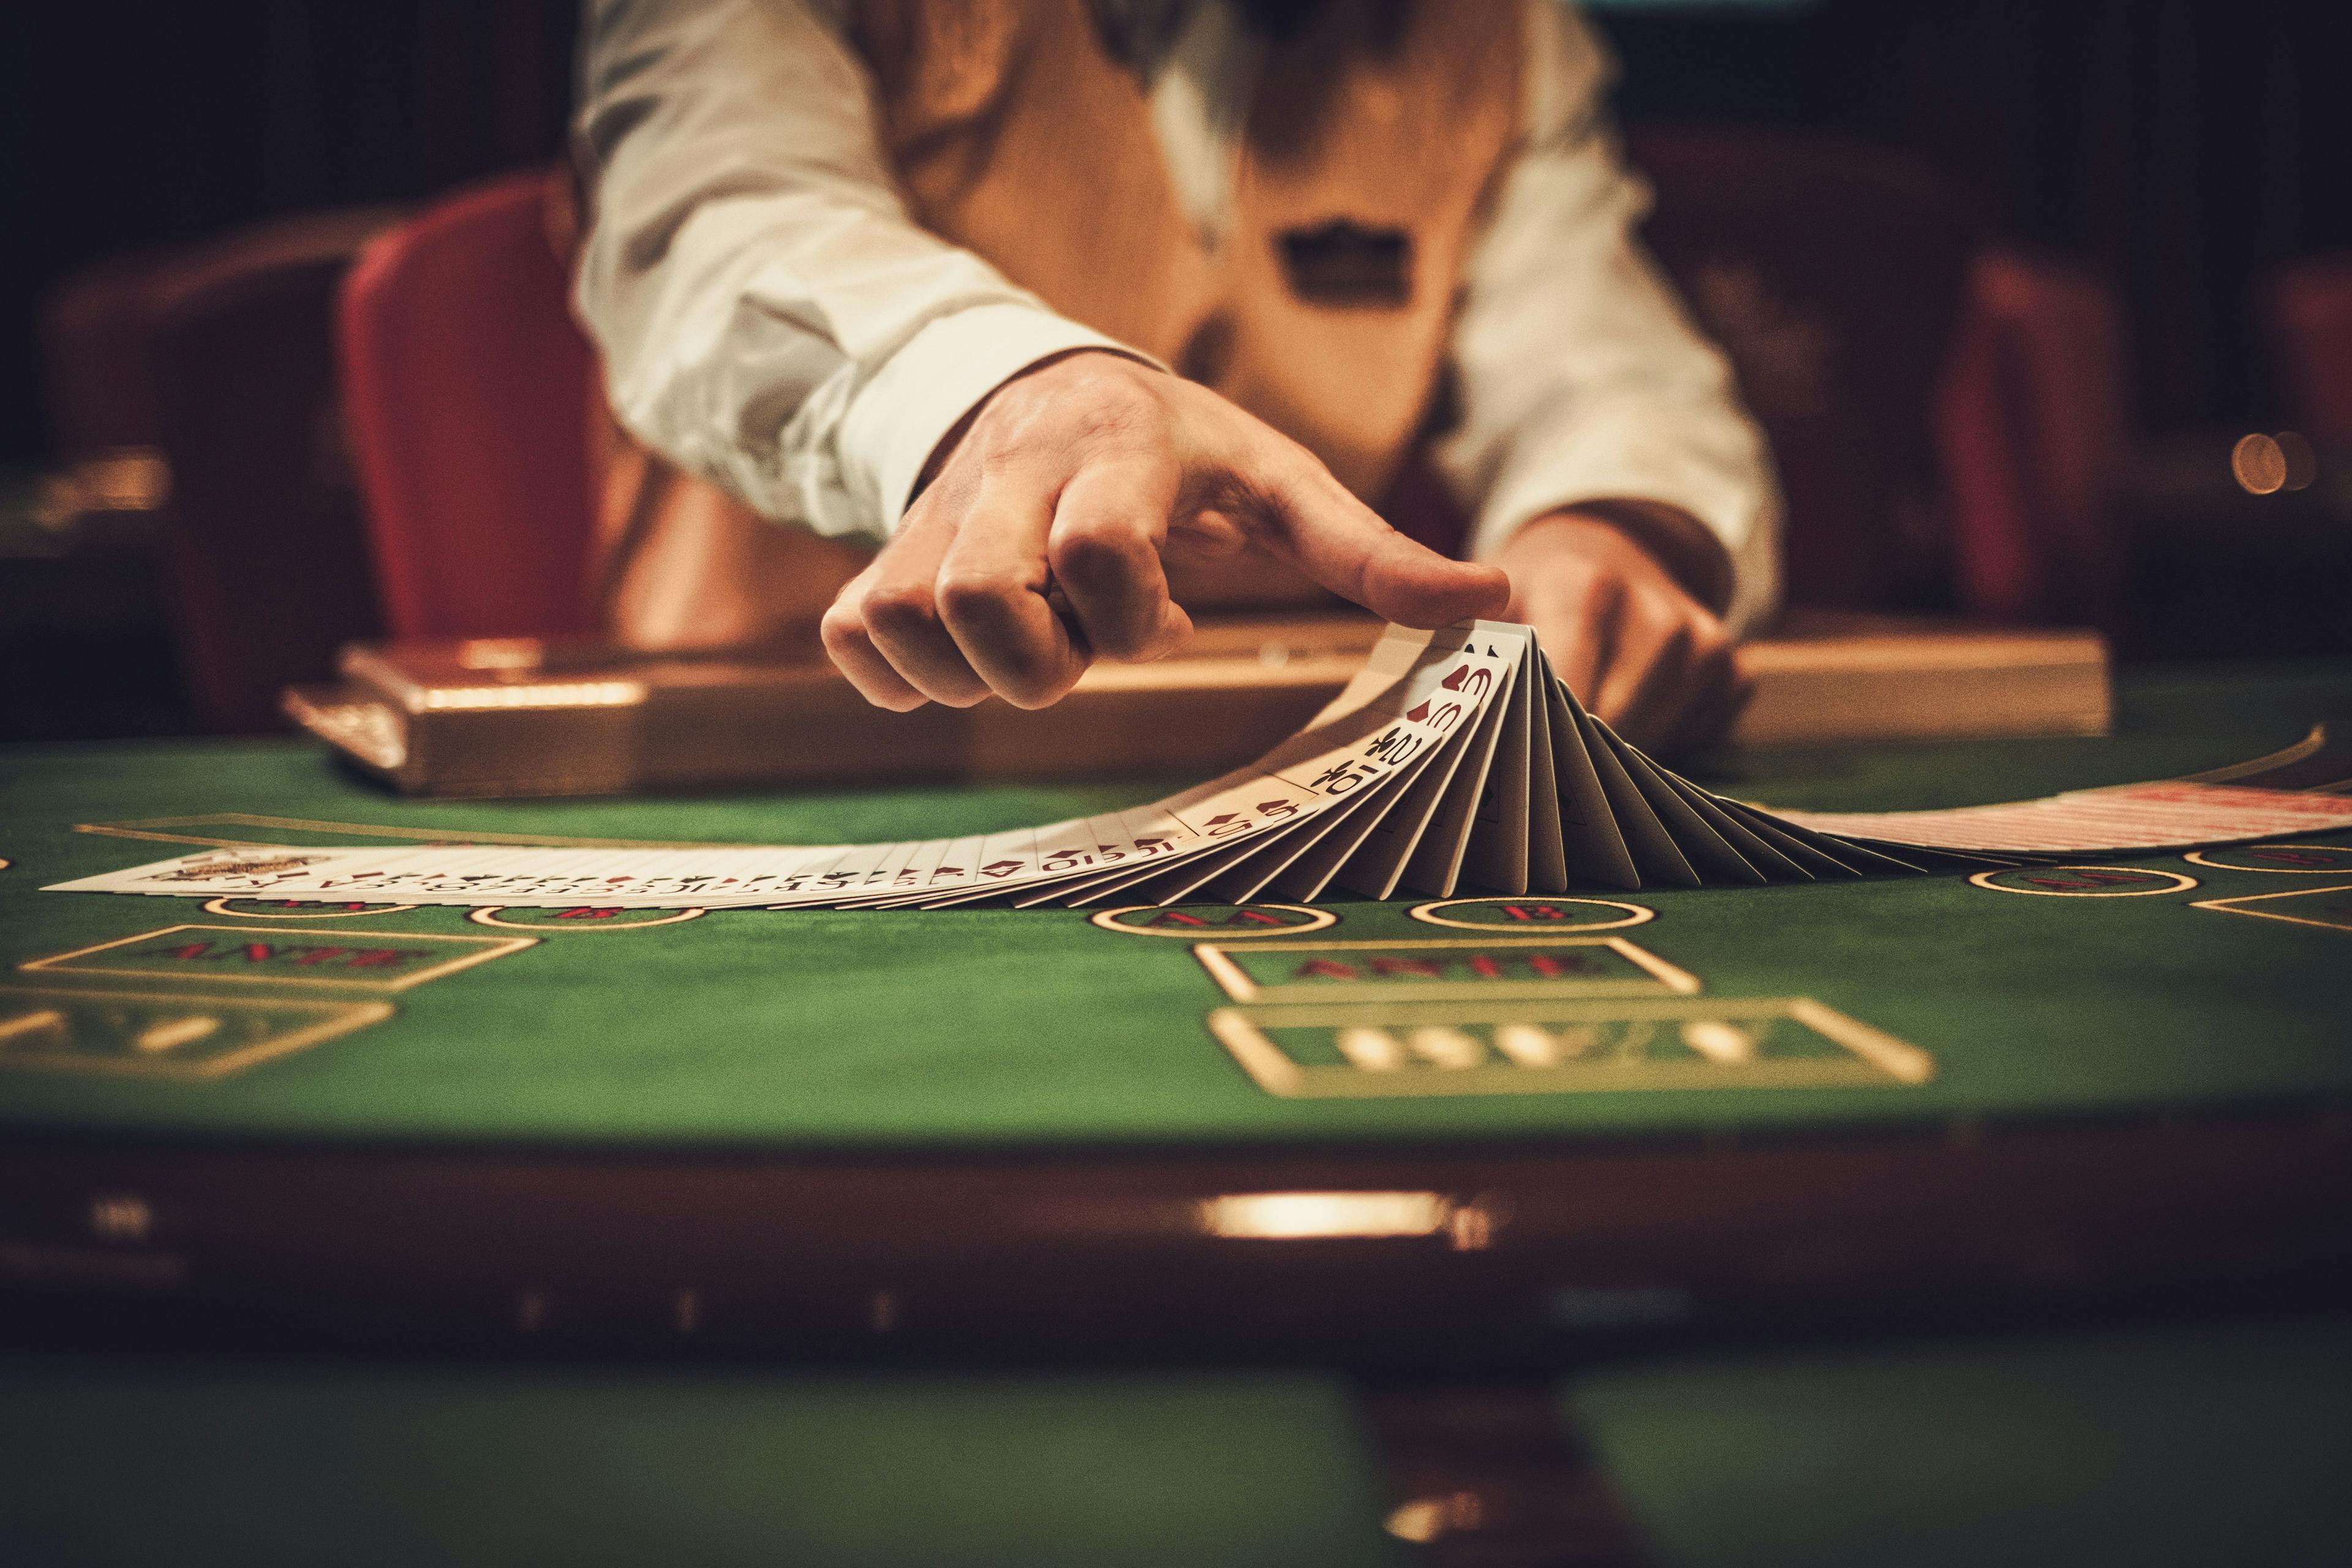 Croupier behind gambling table in a casino. credit: Nejron Photo stock.adobe.com